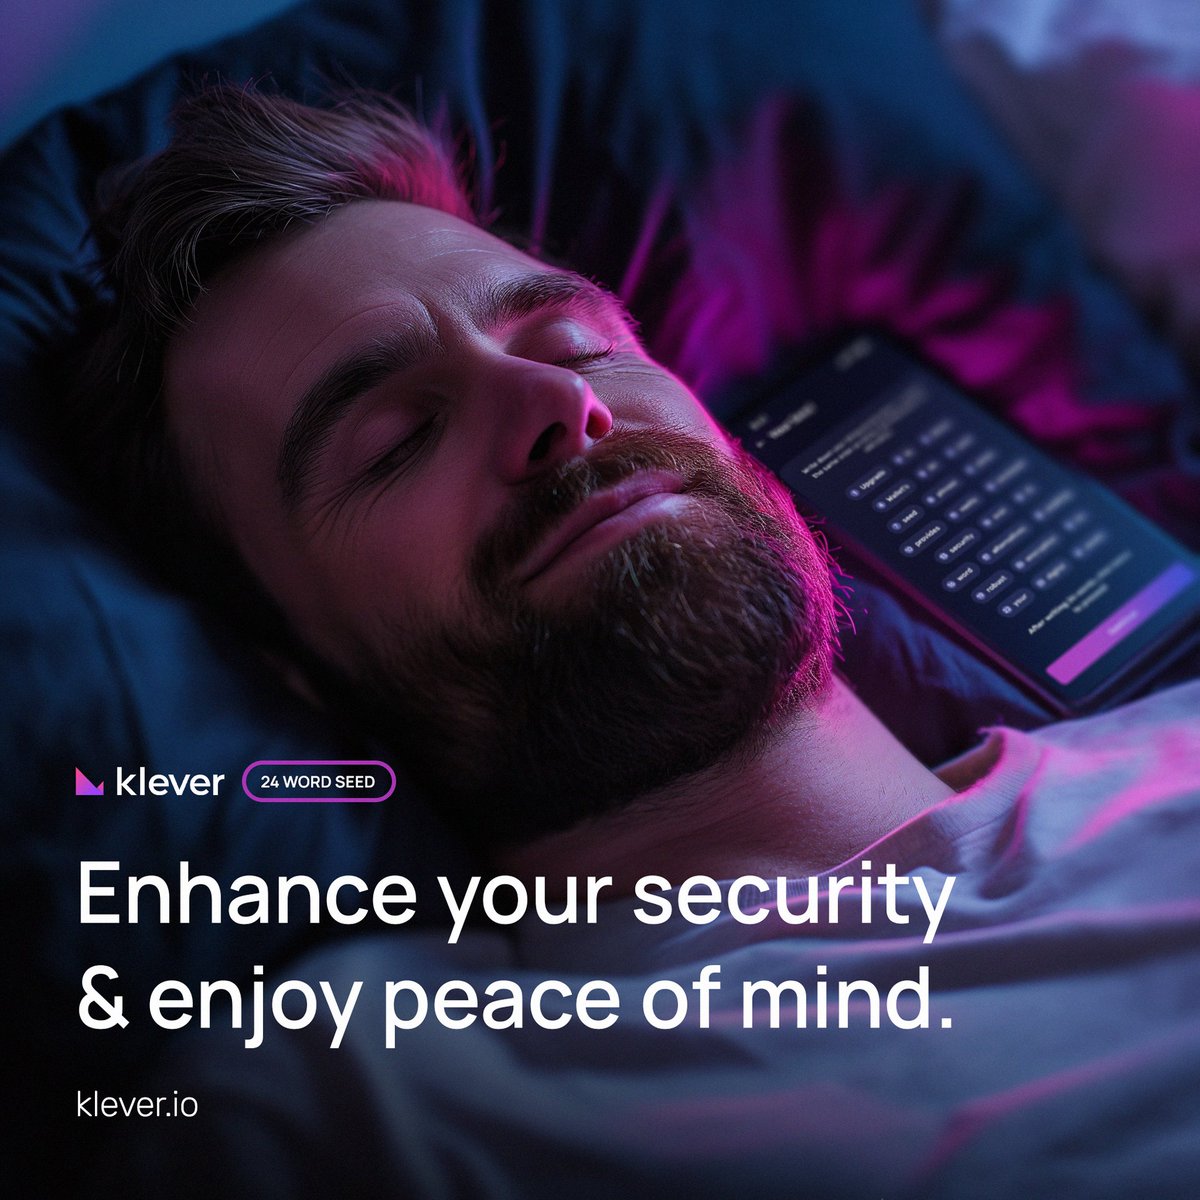 🌙 Dream easy knowing your crypto is secure. With Klever Wallet's 24-word seed, you get the ultimate encryption while you rest. Upgrade to Klever security & sleep as soundly as your investments. 👉 klever.io